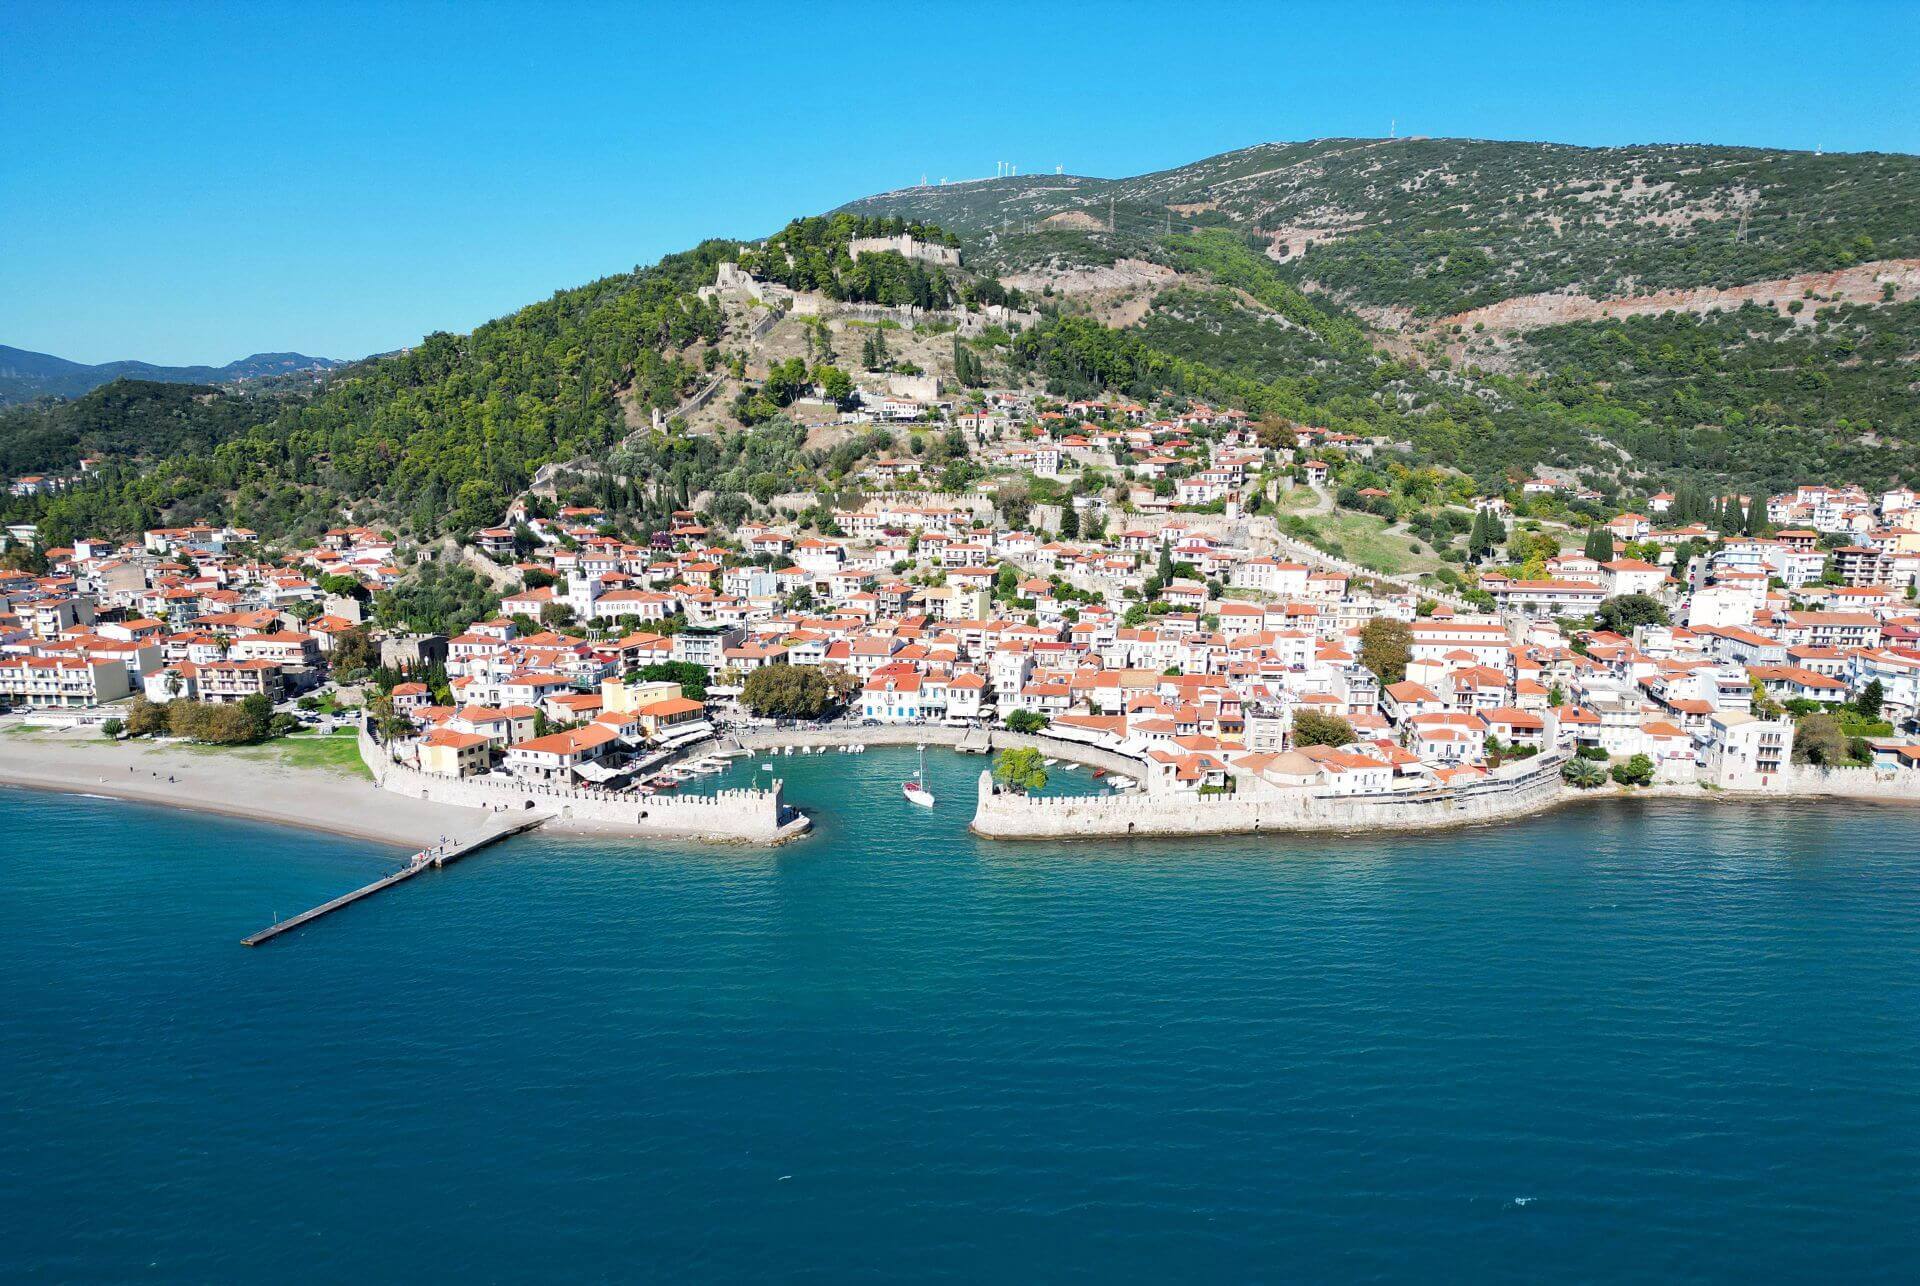 Nafpaktos: View of the town and the castle